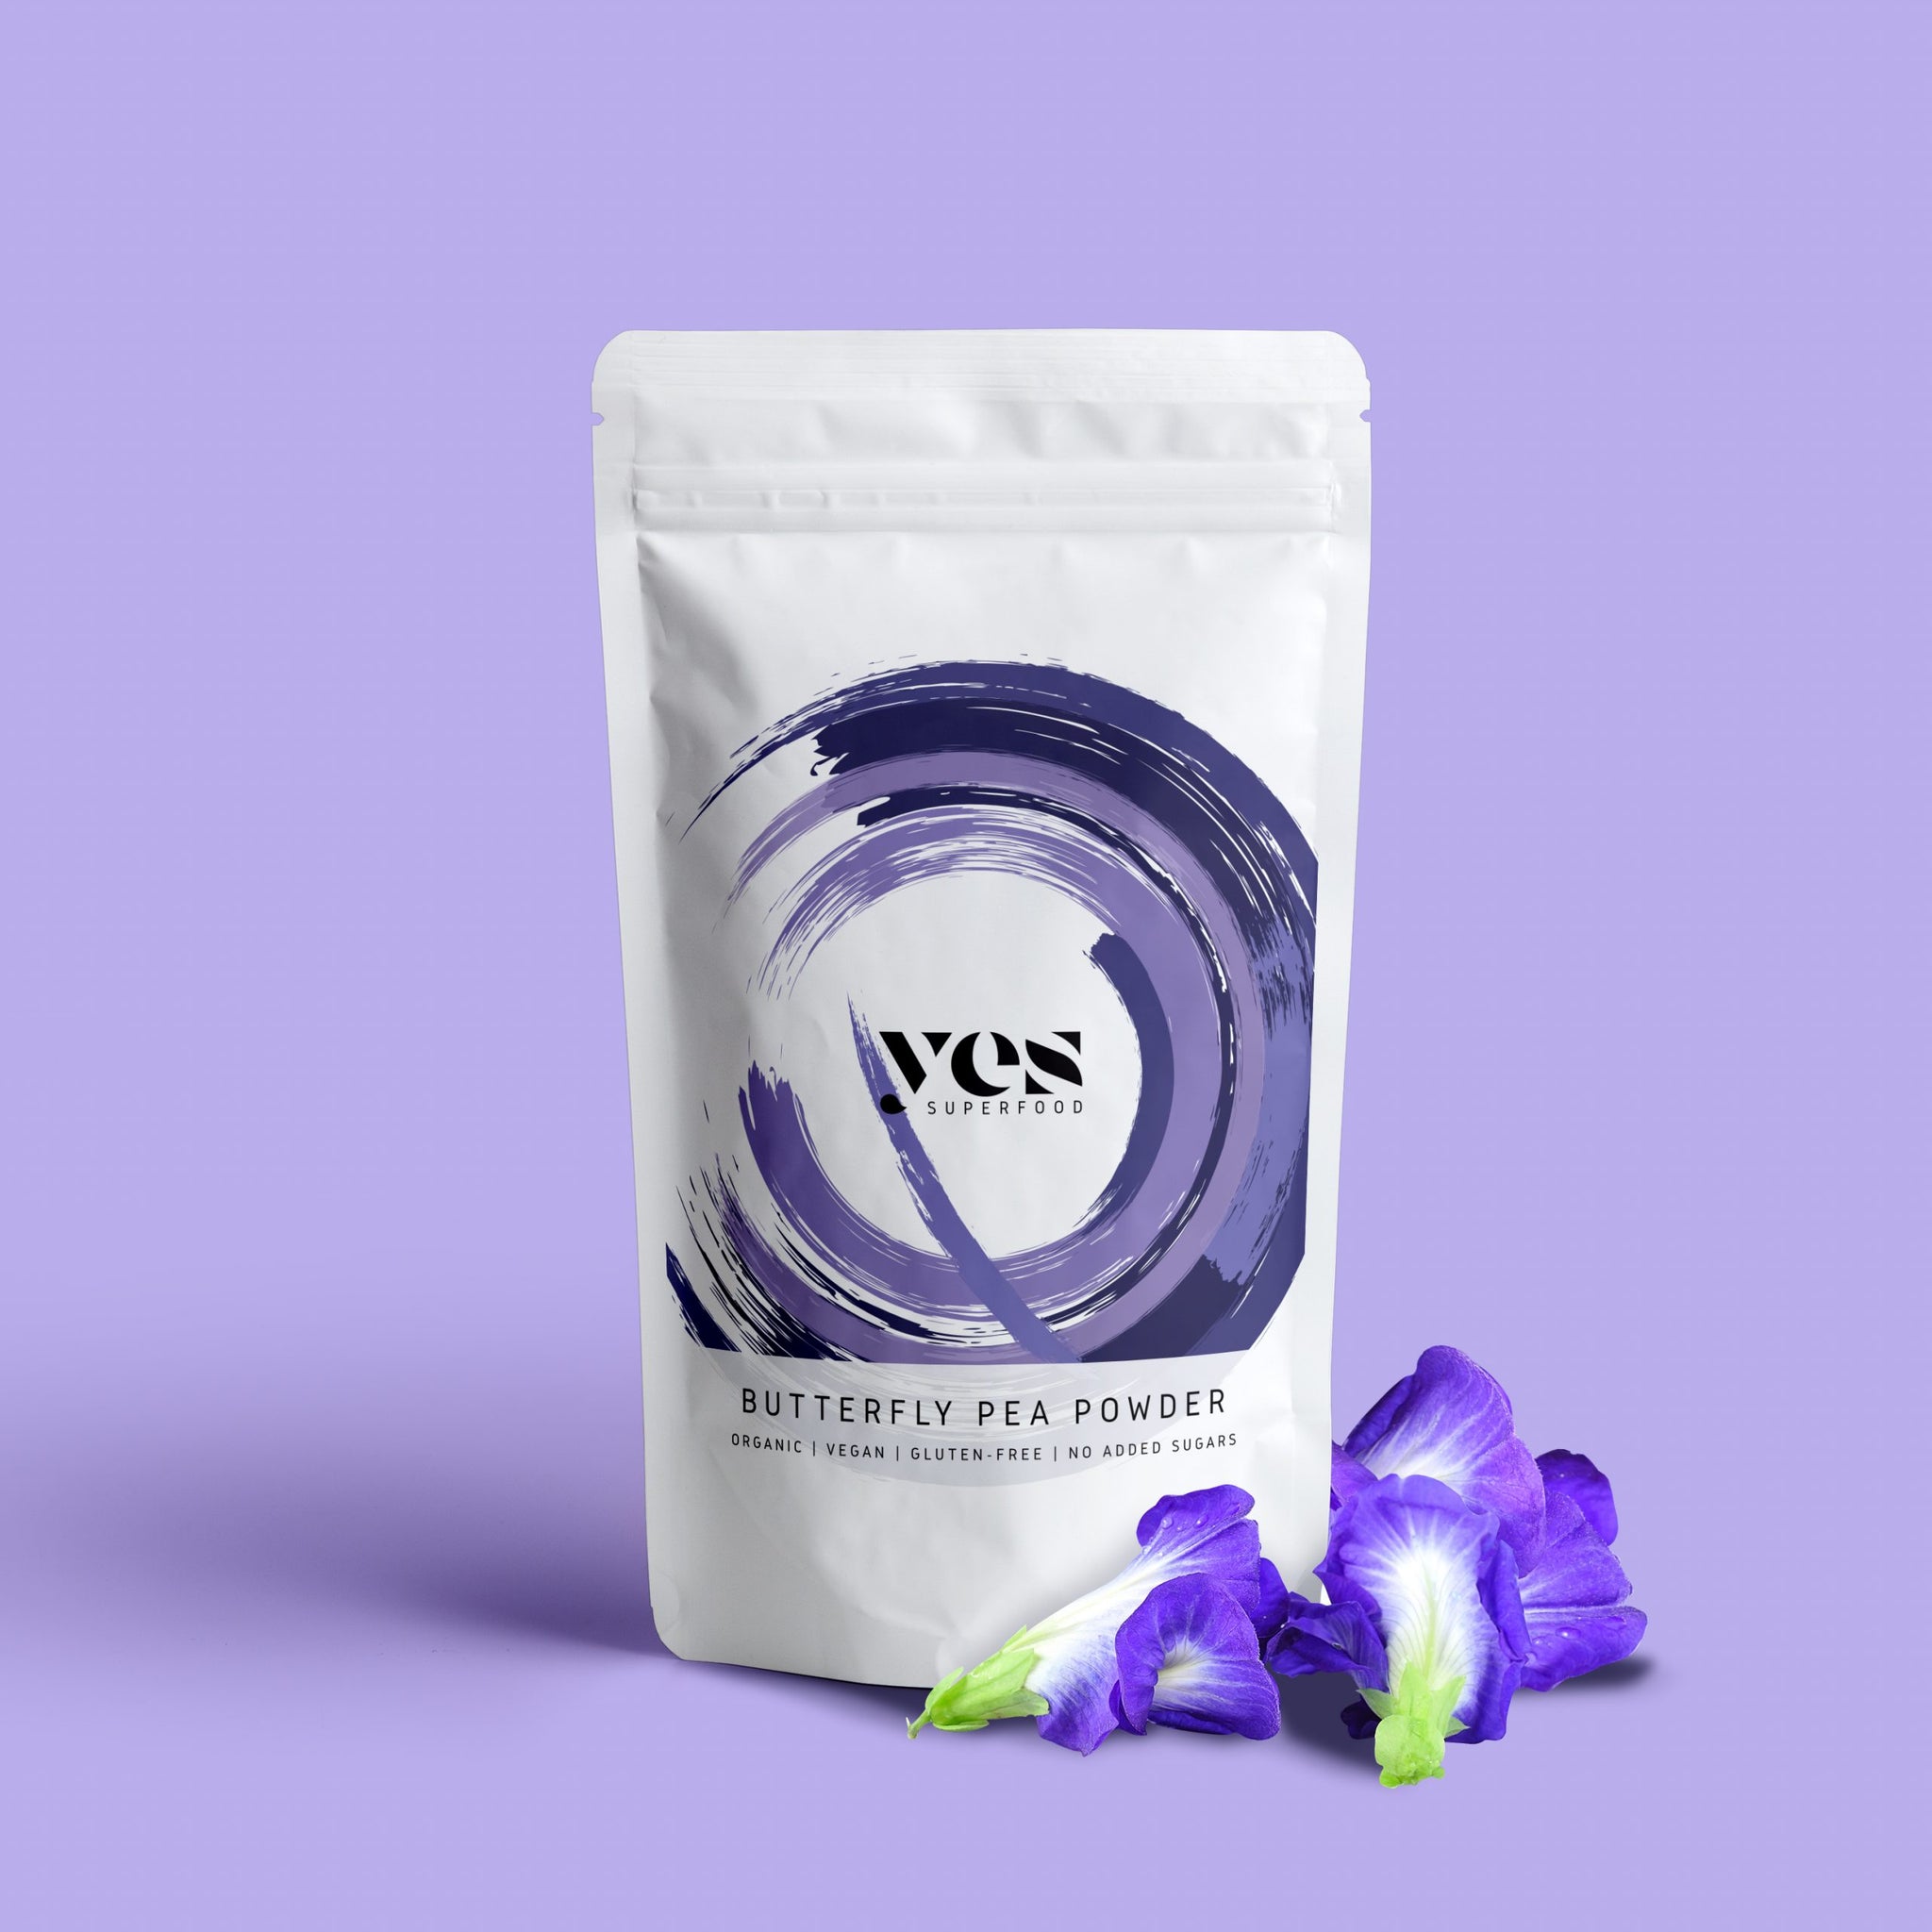 yessuperfood butterfly pea powder